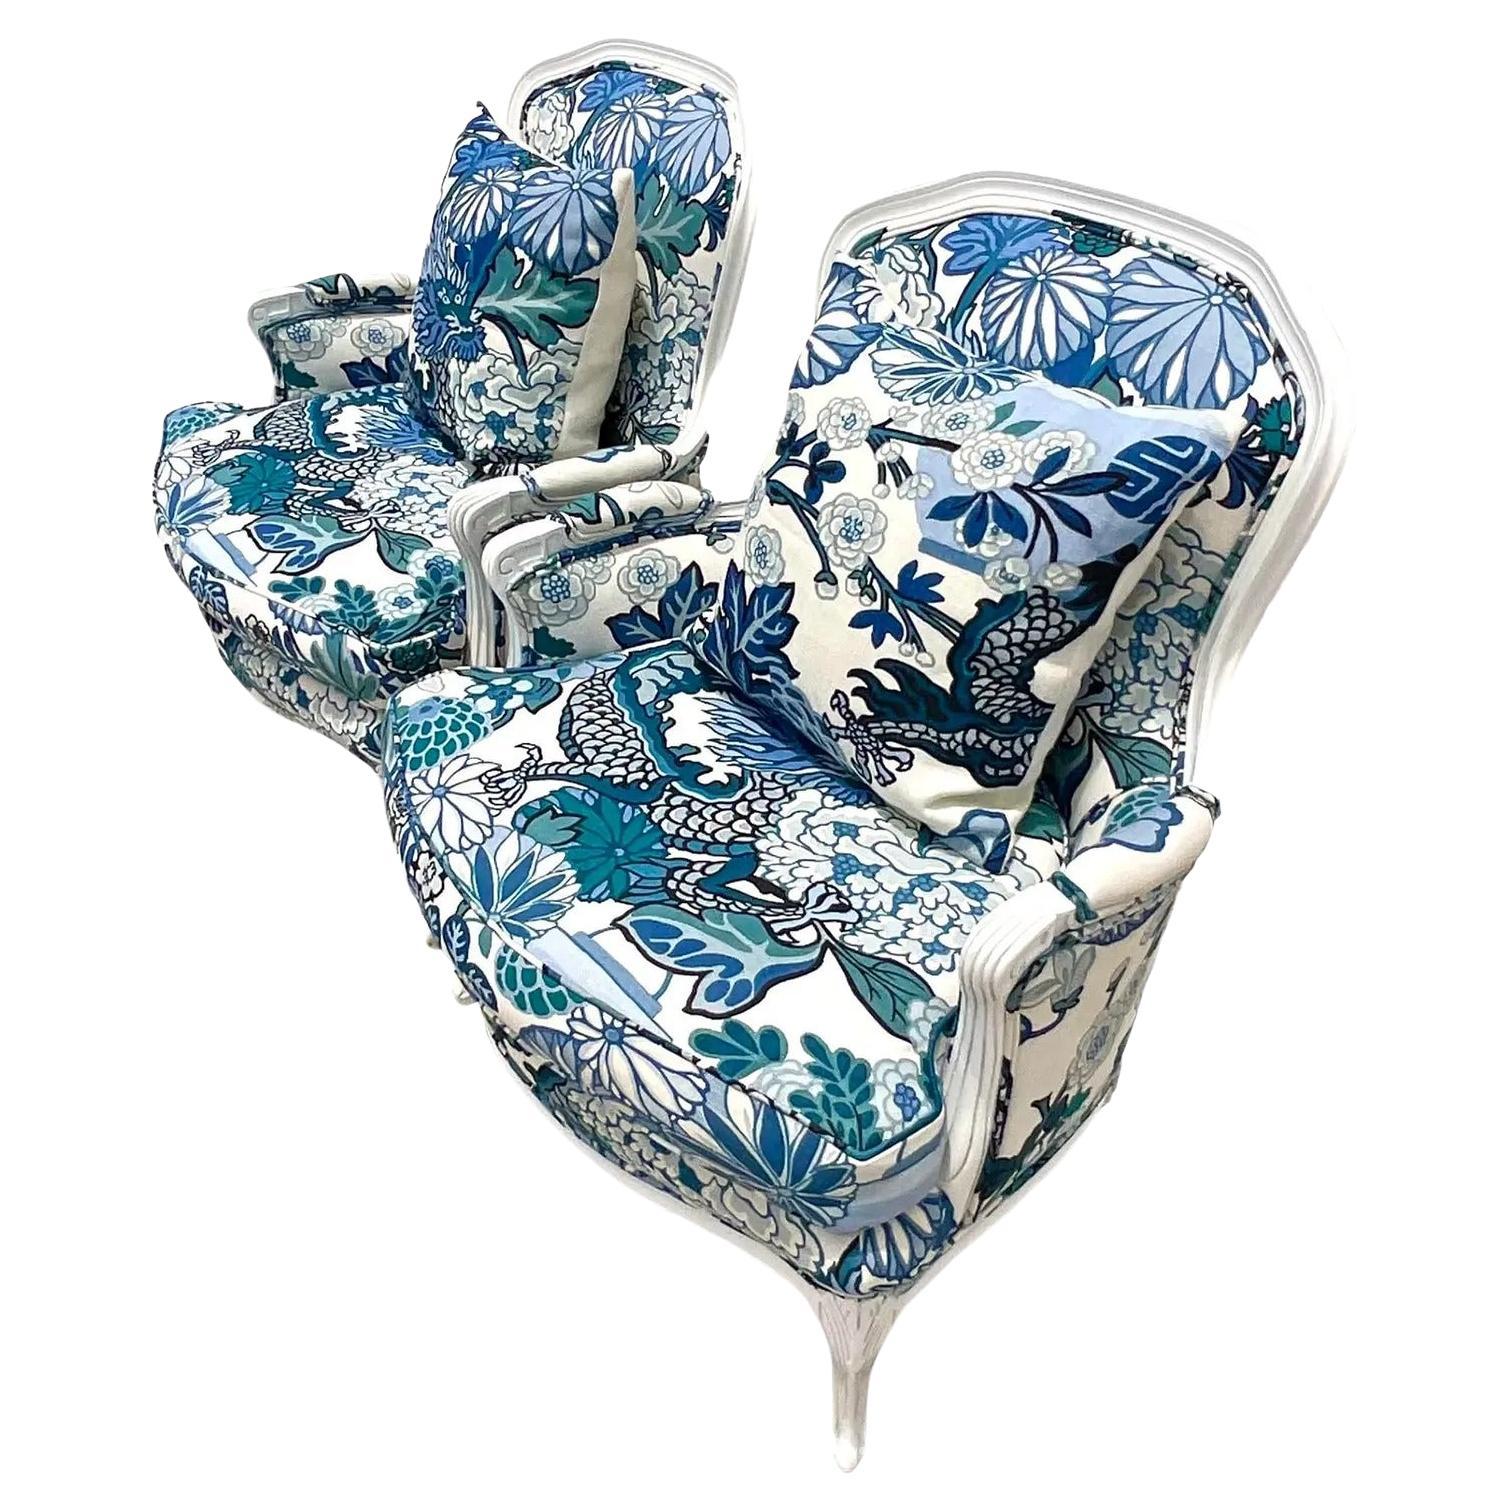 Vintage Boho Bergere Chairs in Brunschwig & Fils Dragon Print - a Pair